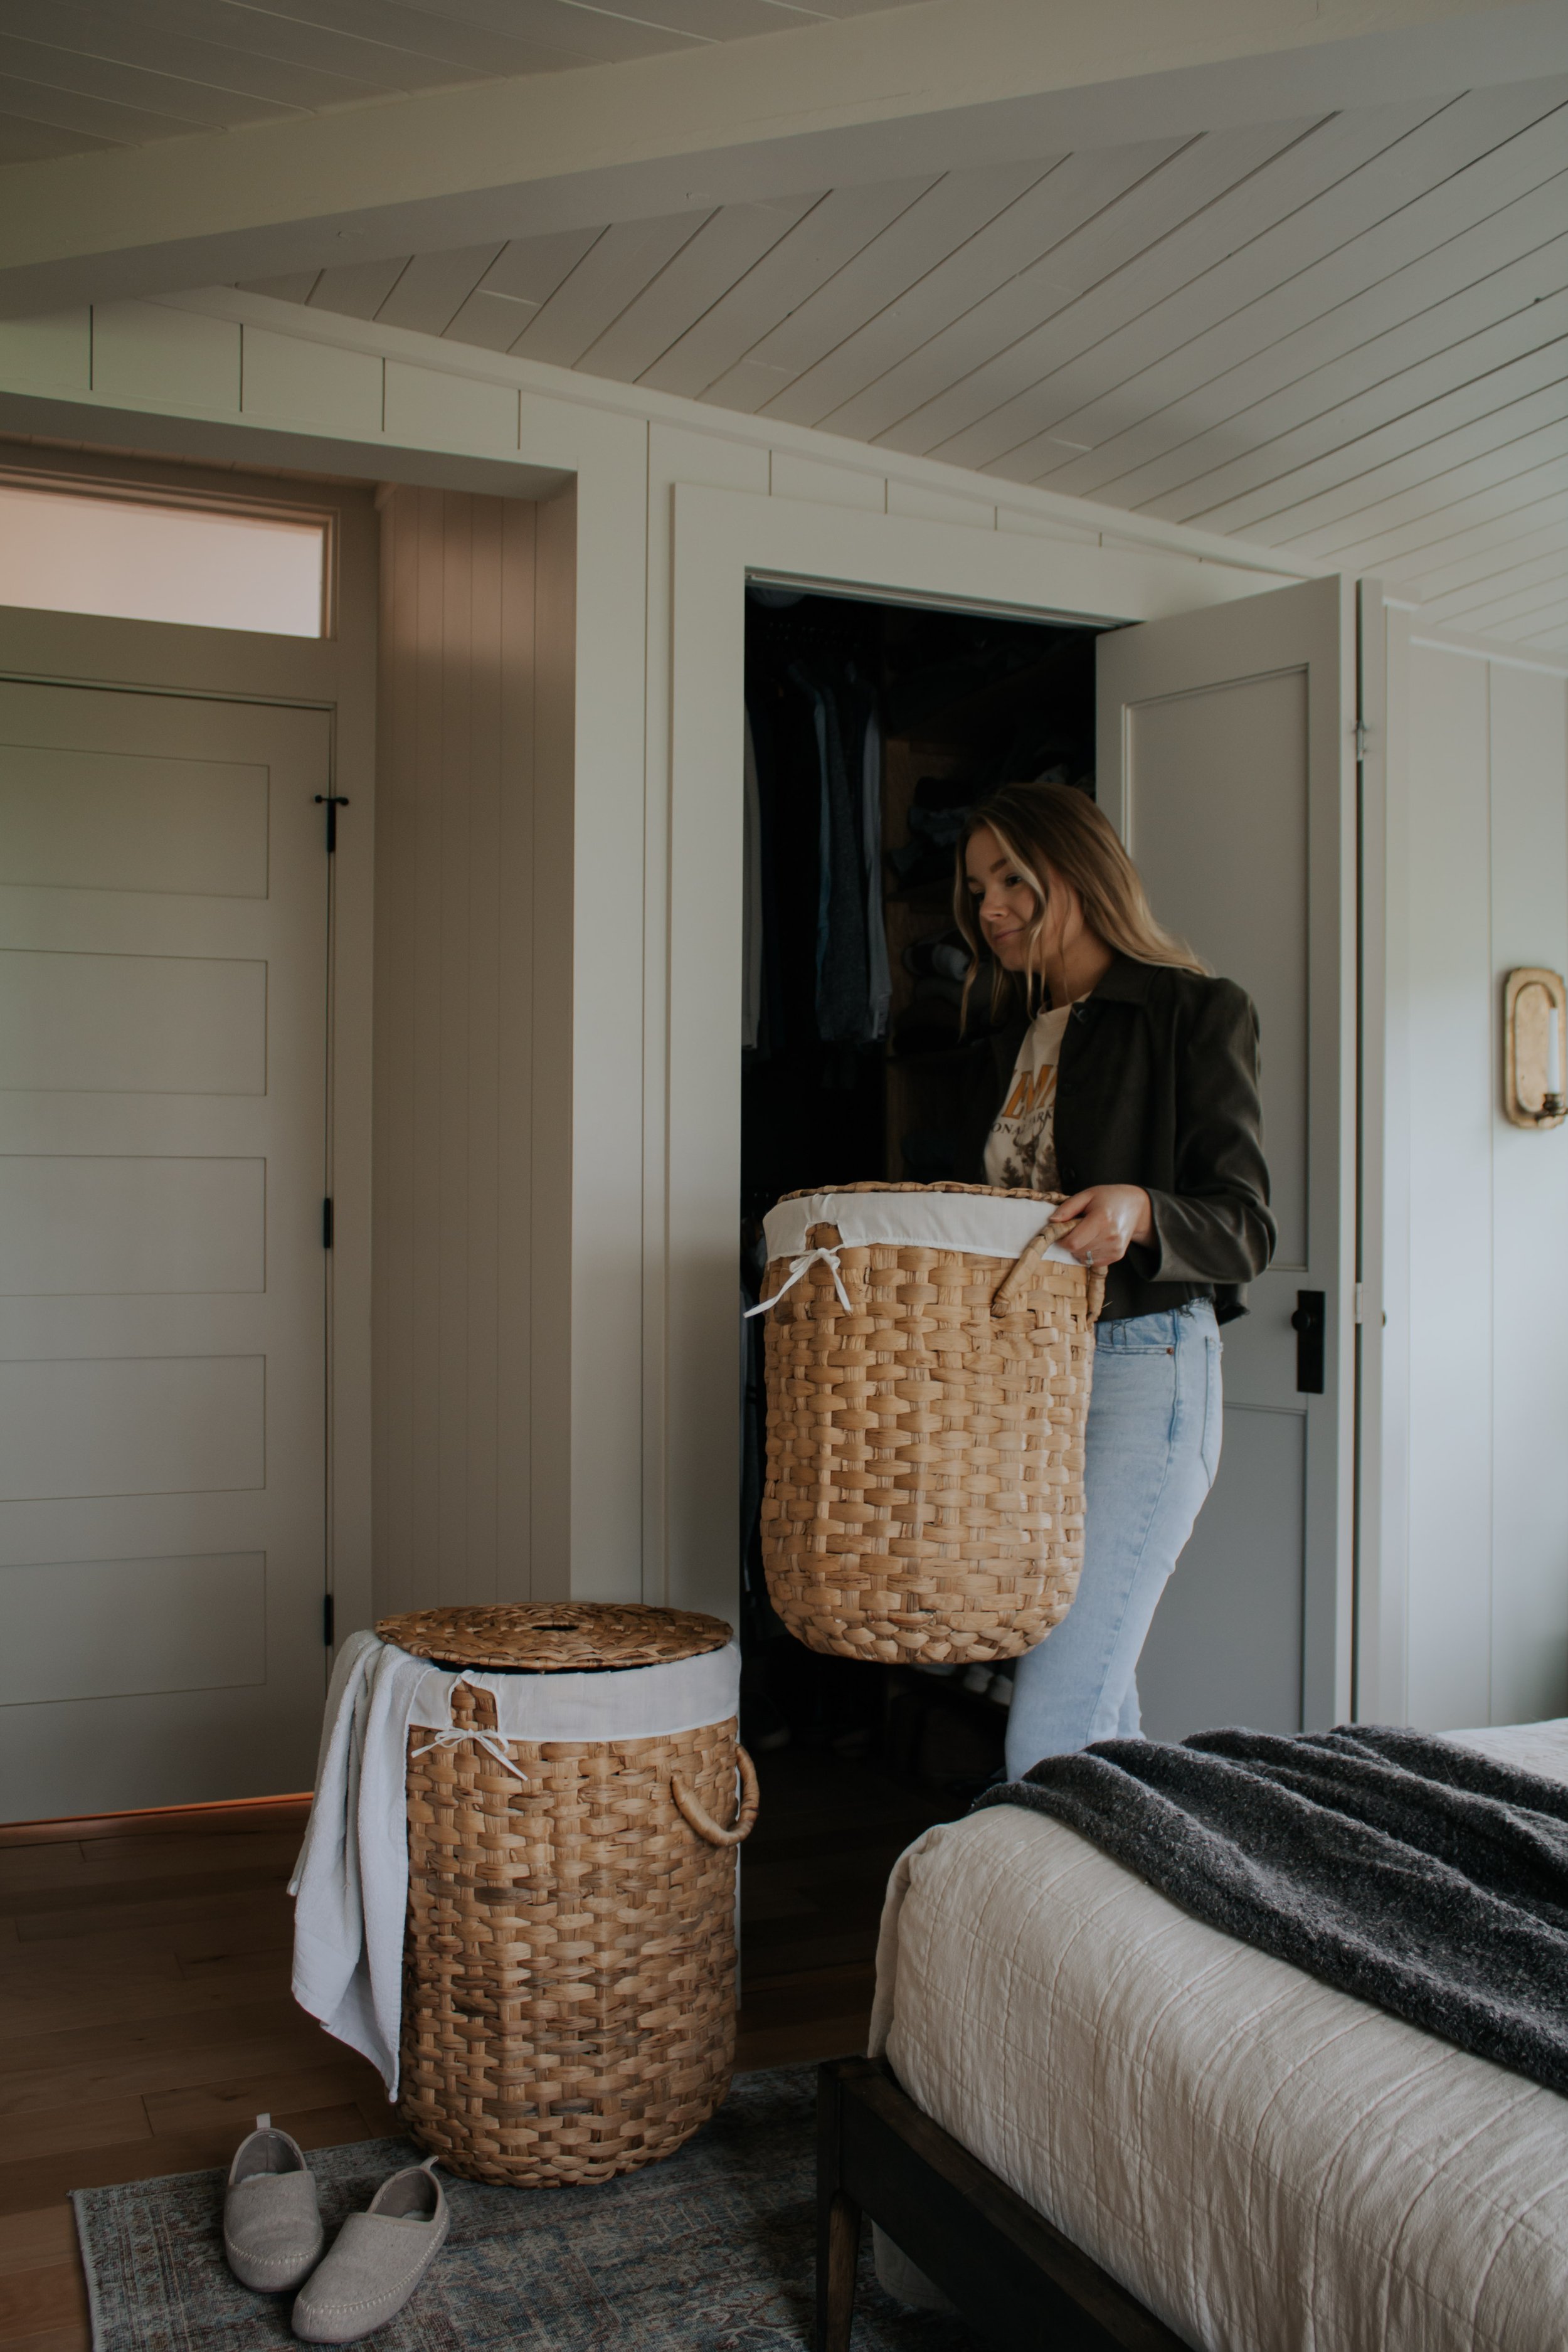 A roundup of my favorite pretty hampers. Woven hampers that look like baskets. Hampers you can leave in plain sight. 16 basket hampers with lids and liners. Hampers for the bedroom, bathroom, and closet. | Nadine Stay